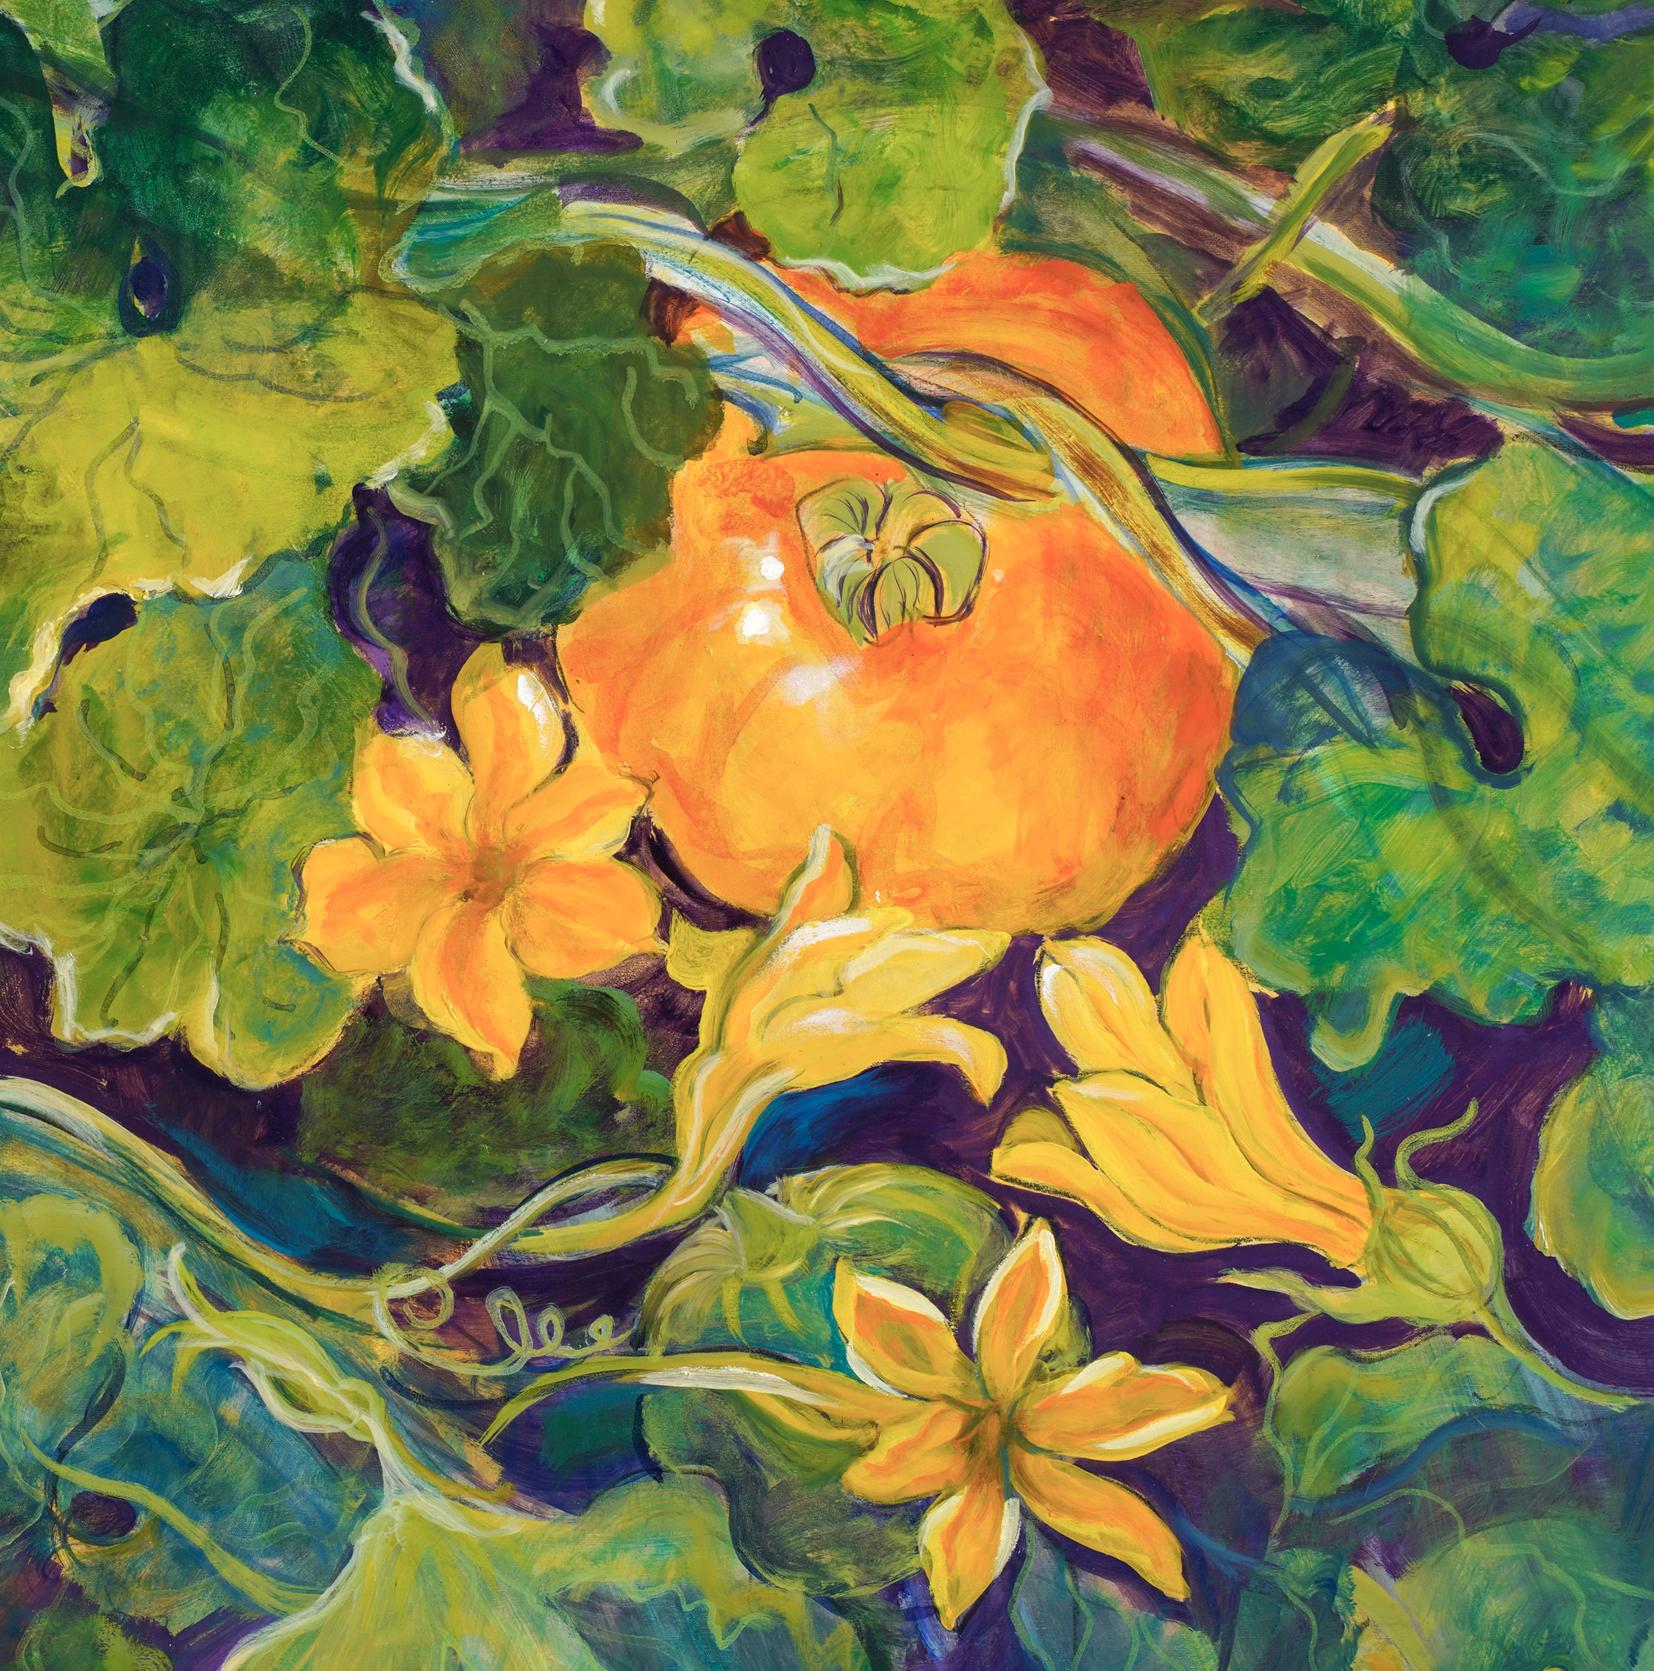 Zucchini Blossom - Painting by Evelyne Ballestra